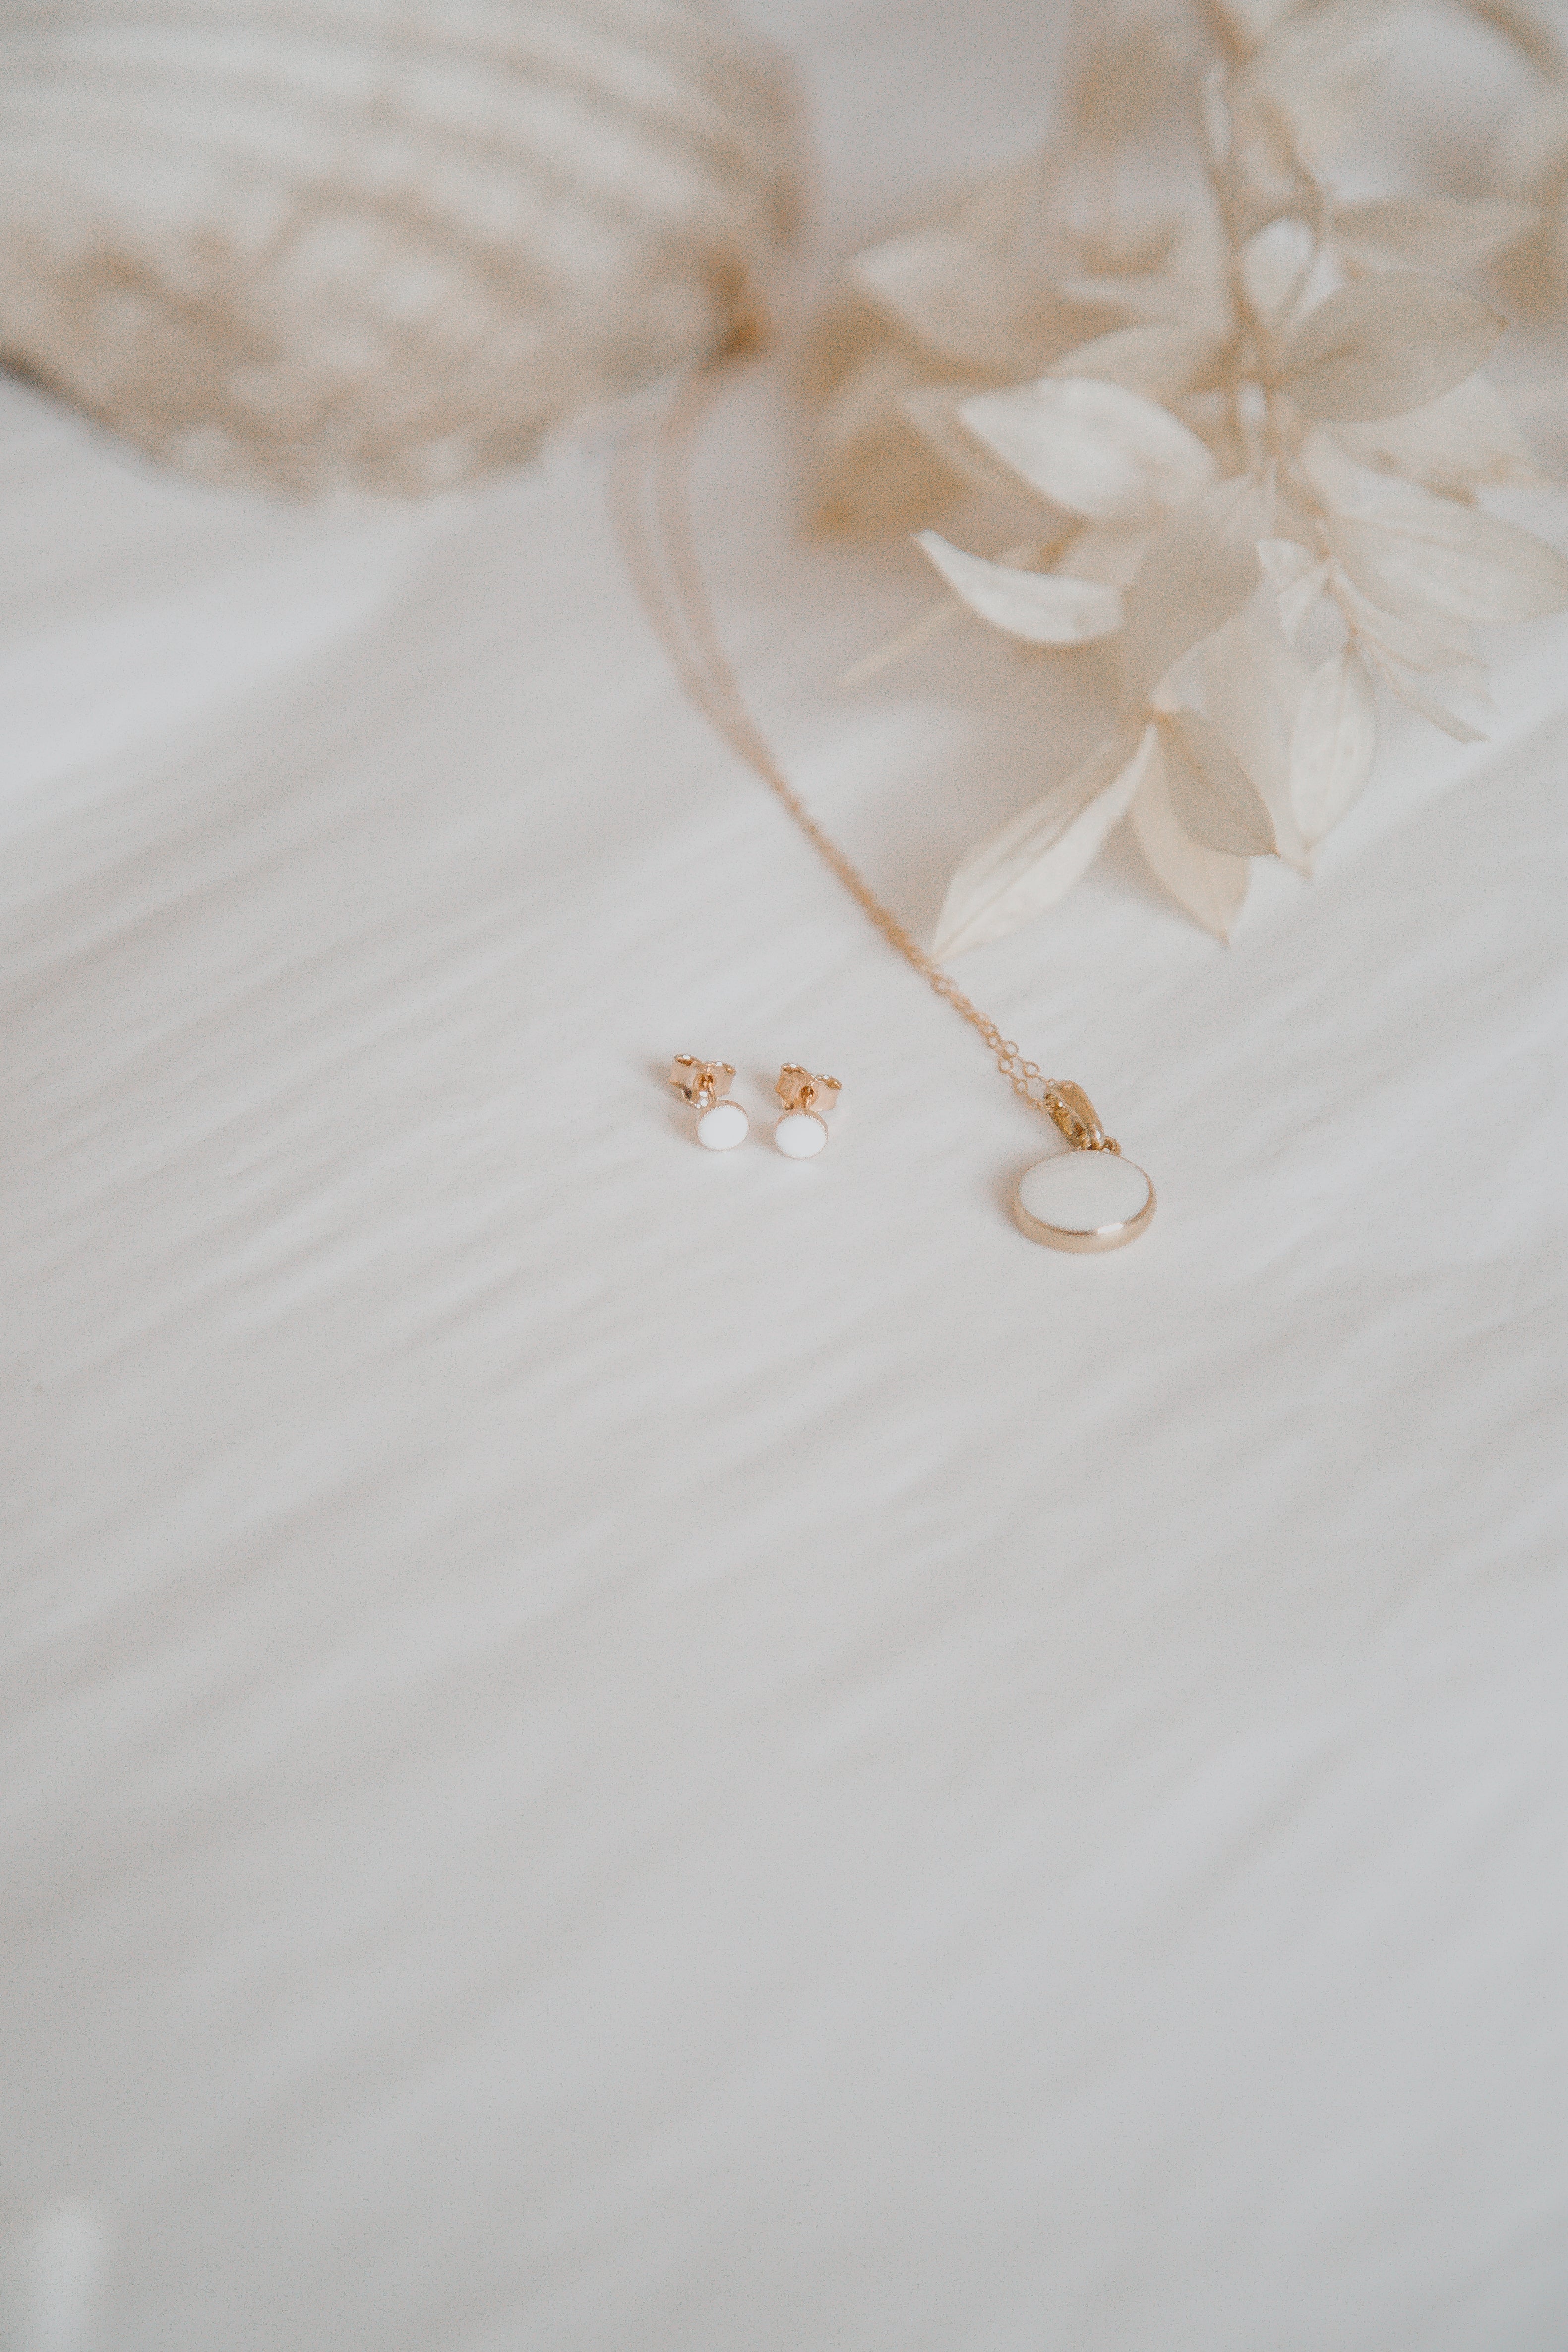 Breastmilk Round Gold Pendant Necklace